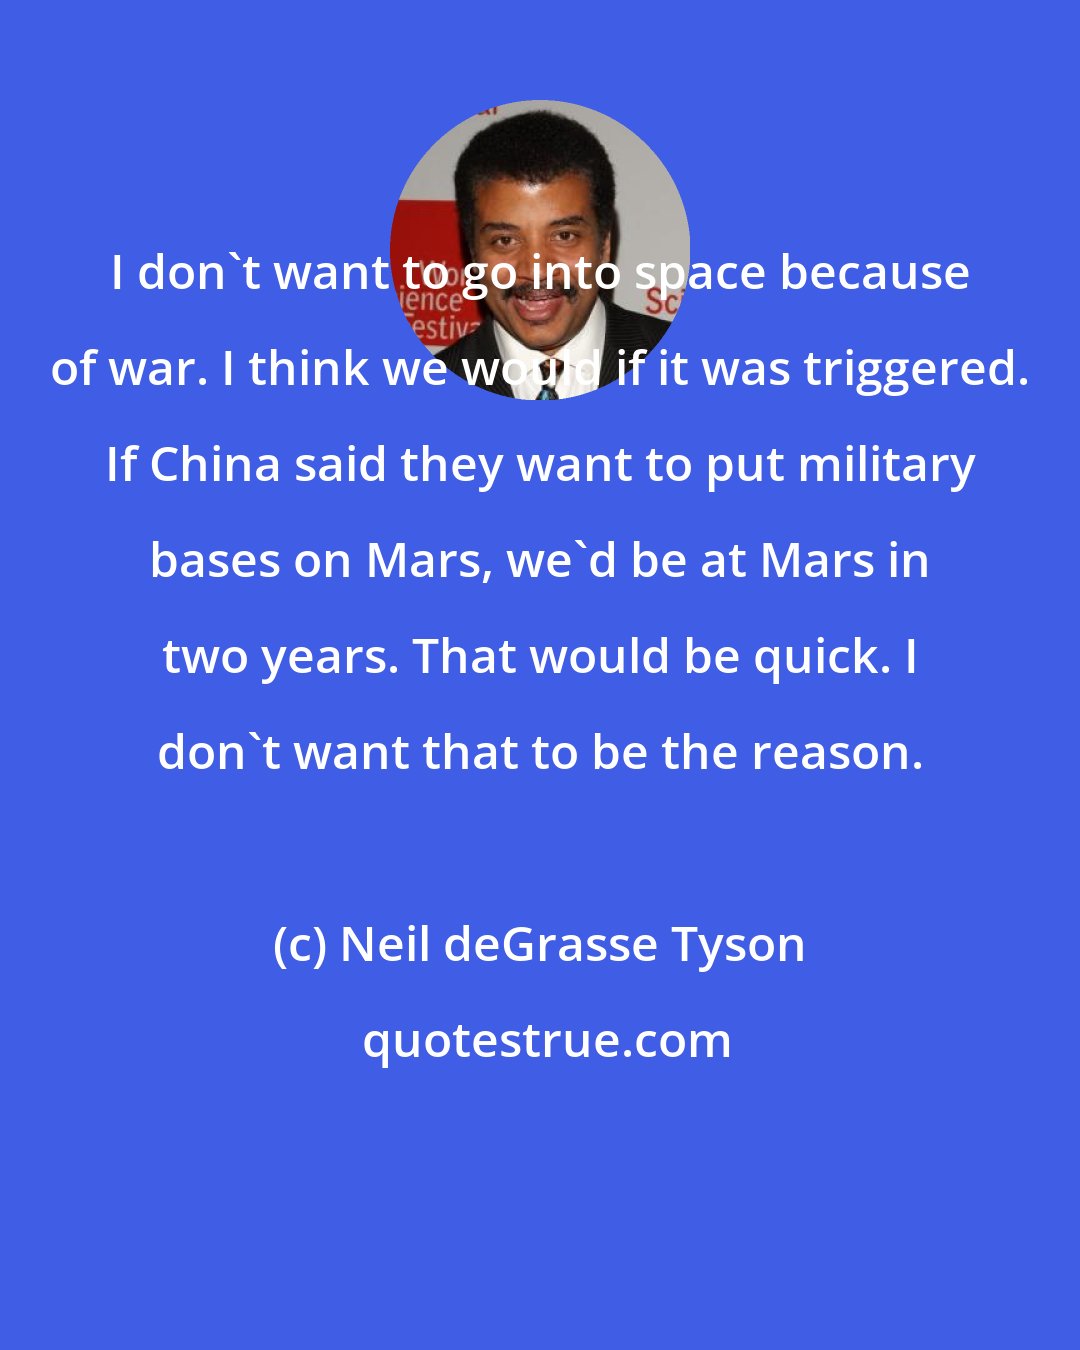 Neil deGrasse Tyson: I don't want to go into space because of war. I think we would if it was triggered. If China said they want to put military bases on Mars, we'd be at Mars in two years. That would be quick. I don't want that to be the reason.